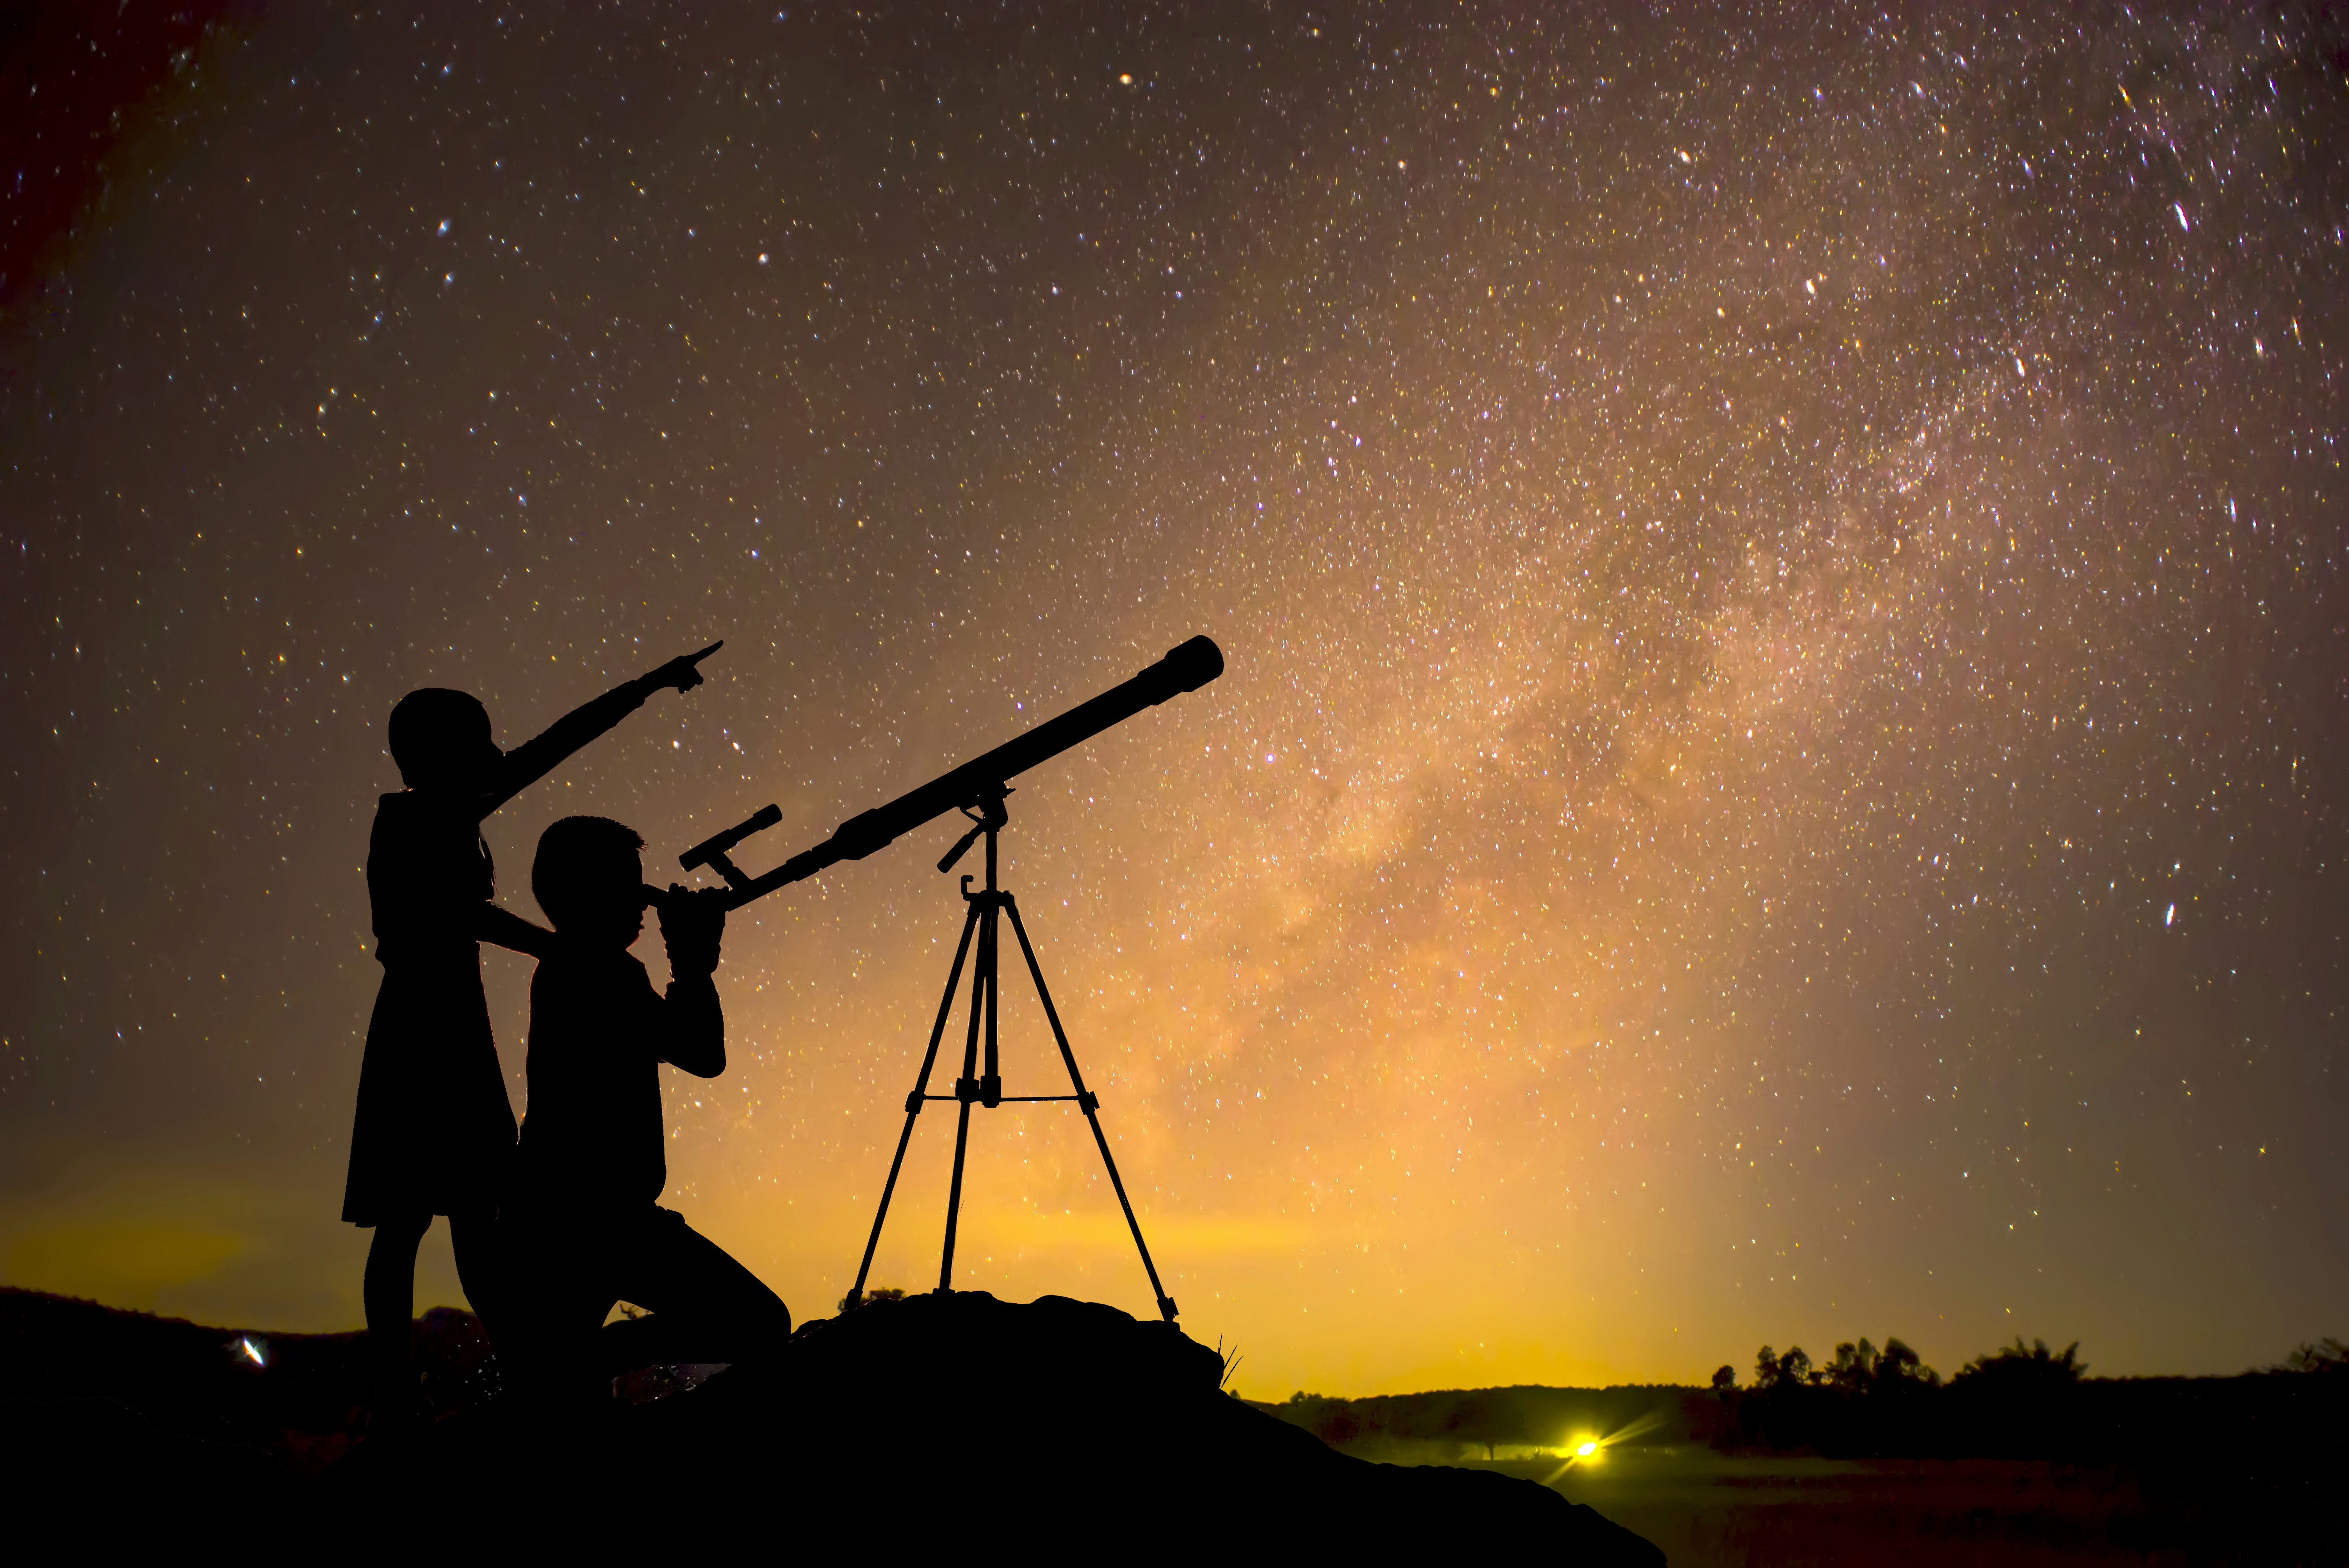 A child peering through a telescope while another points at the sky